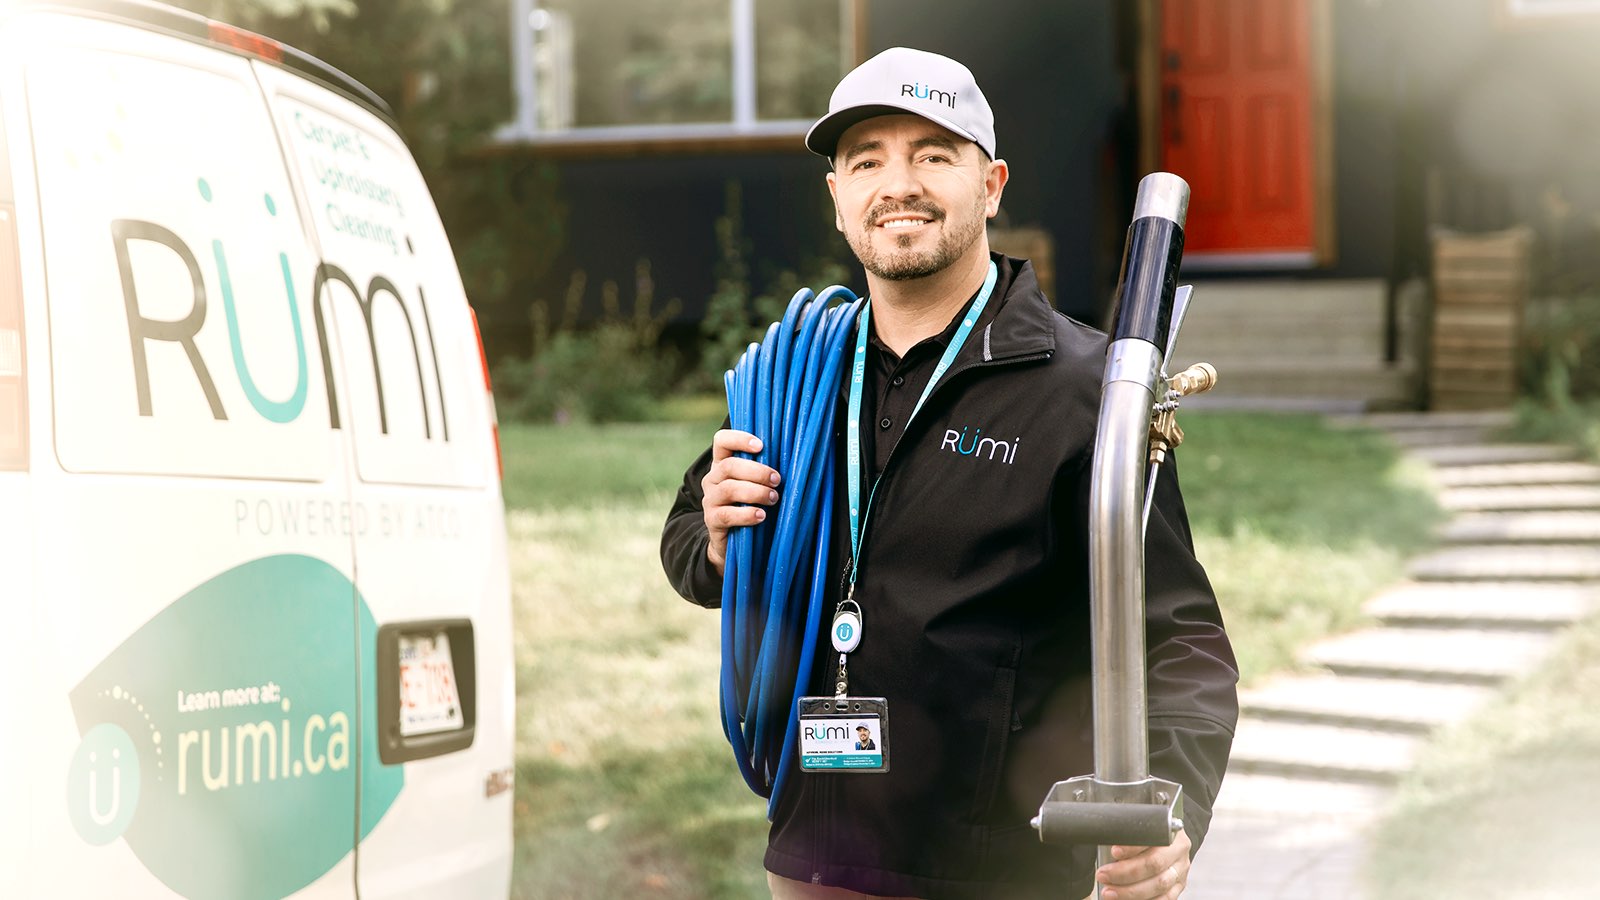 A Rümi technician smiling and facing forward outside beside Rümi work van carrying equipment for home services. 